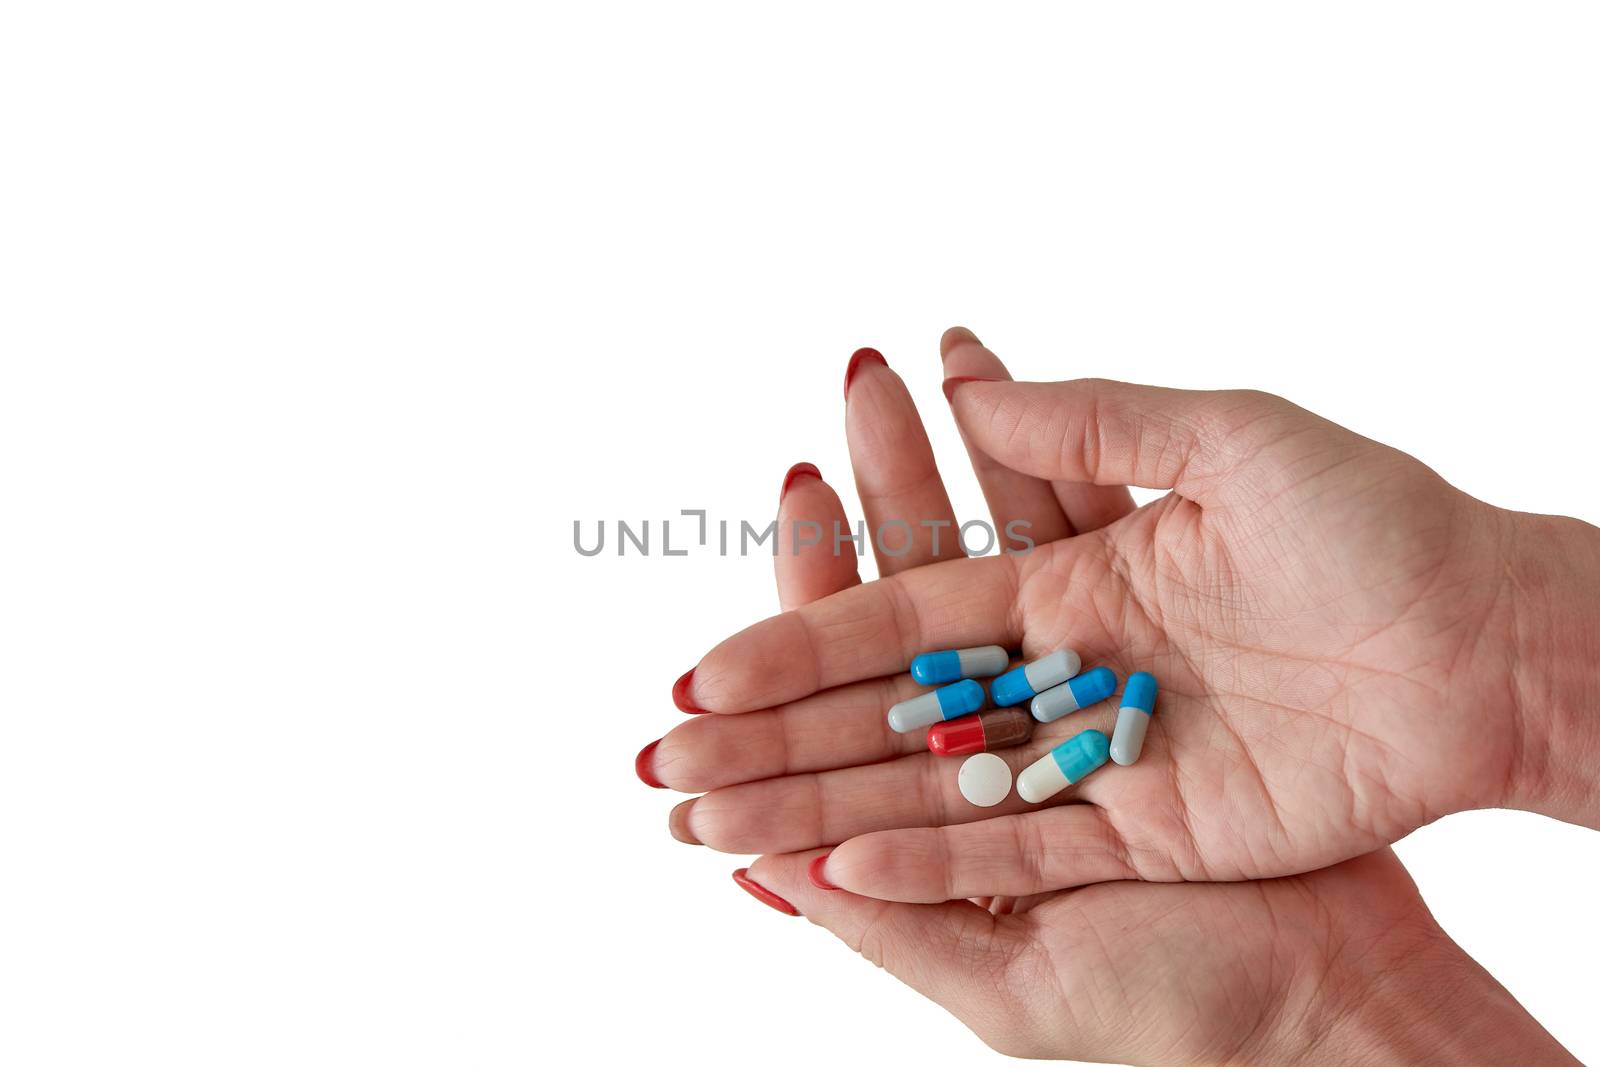 Colored assorted pharmaceutical medicine pills, tablets and capsules on female hand isoleted on white background. Close-up.